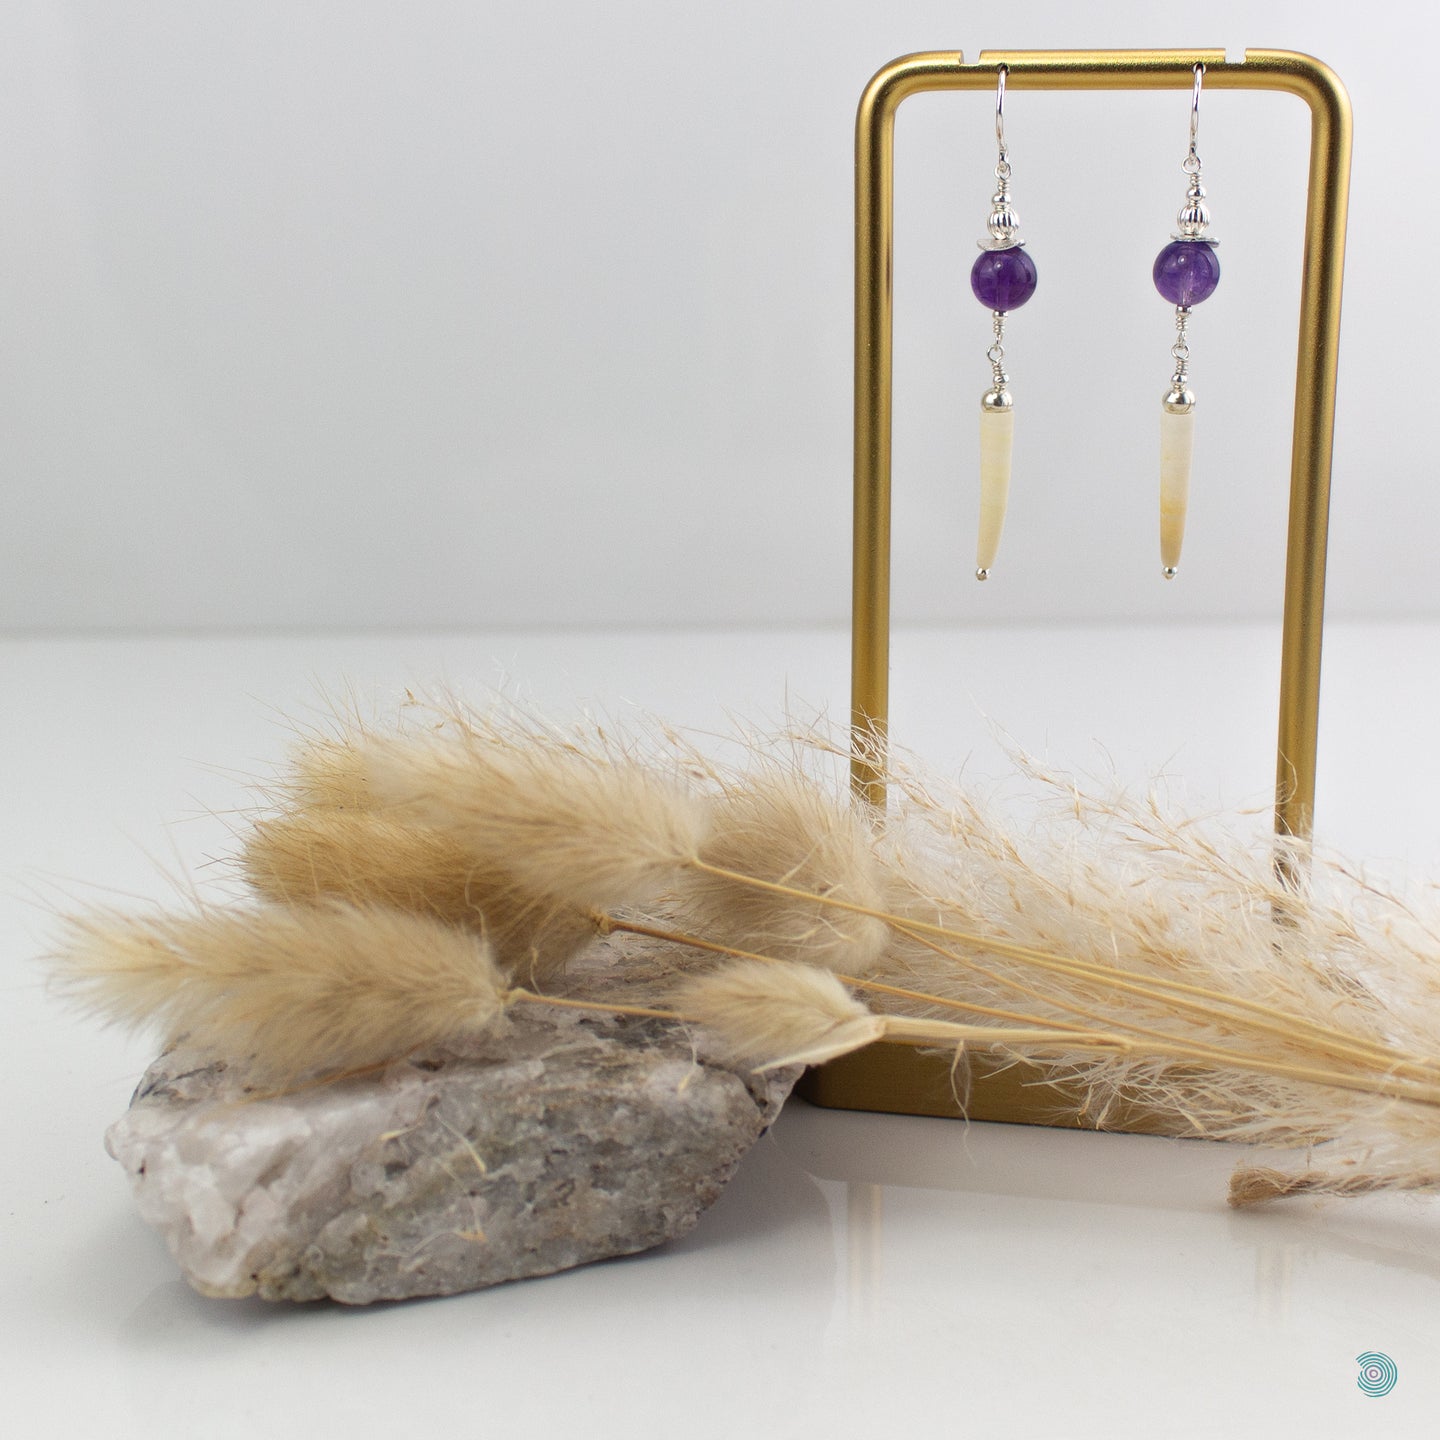 Natural tusk shell drop earrings with round smooth purple amethyst gemstones and sterling silver detail.  These earrings are lightweight and 5cm in drop length from the base of the ear wires.  They come presented in a pretty gift box or safe keeping. Designed and Handmade in Dingle